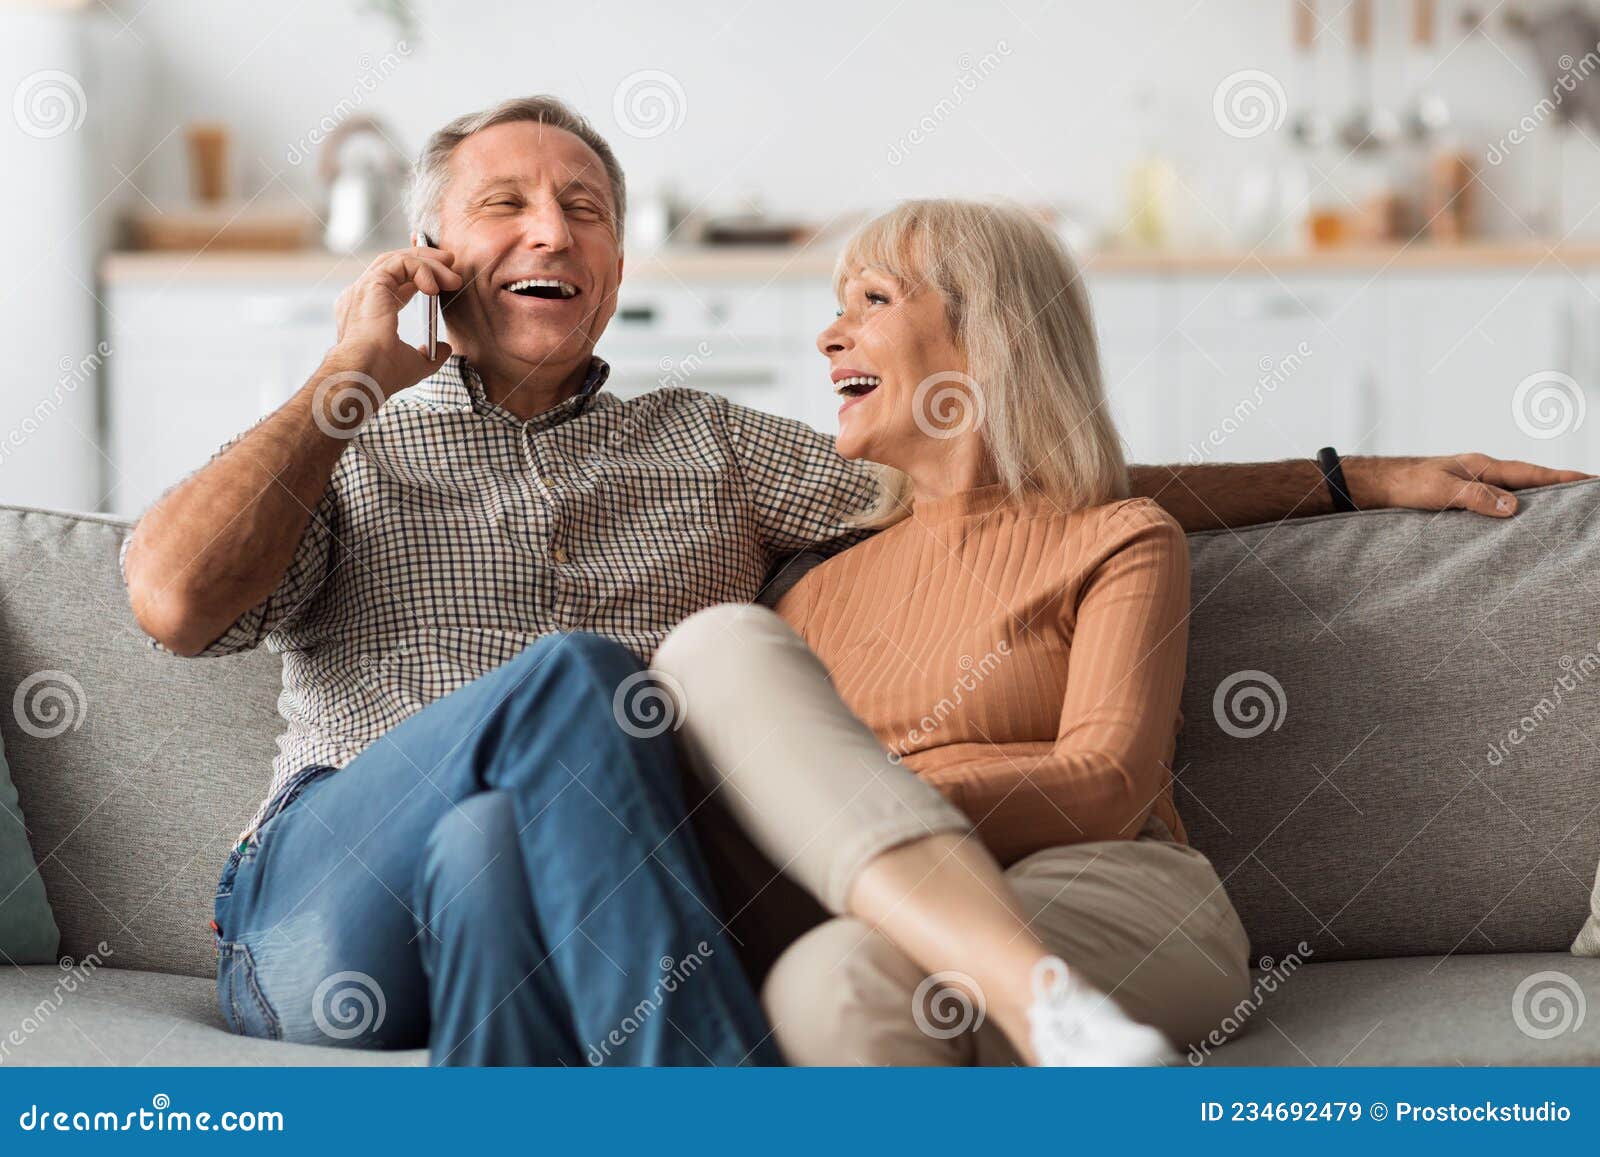 Senior Nudist Couples Home Gallery - Happy Senior Couple Talking on Phone and Laughing at Home Stock Image -  Image of caucasian, leisure: 234692479